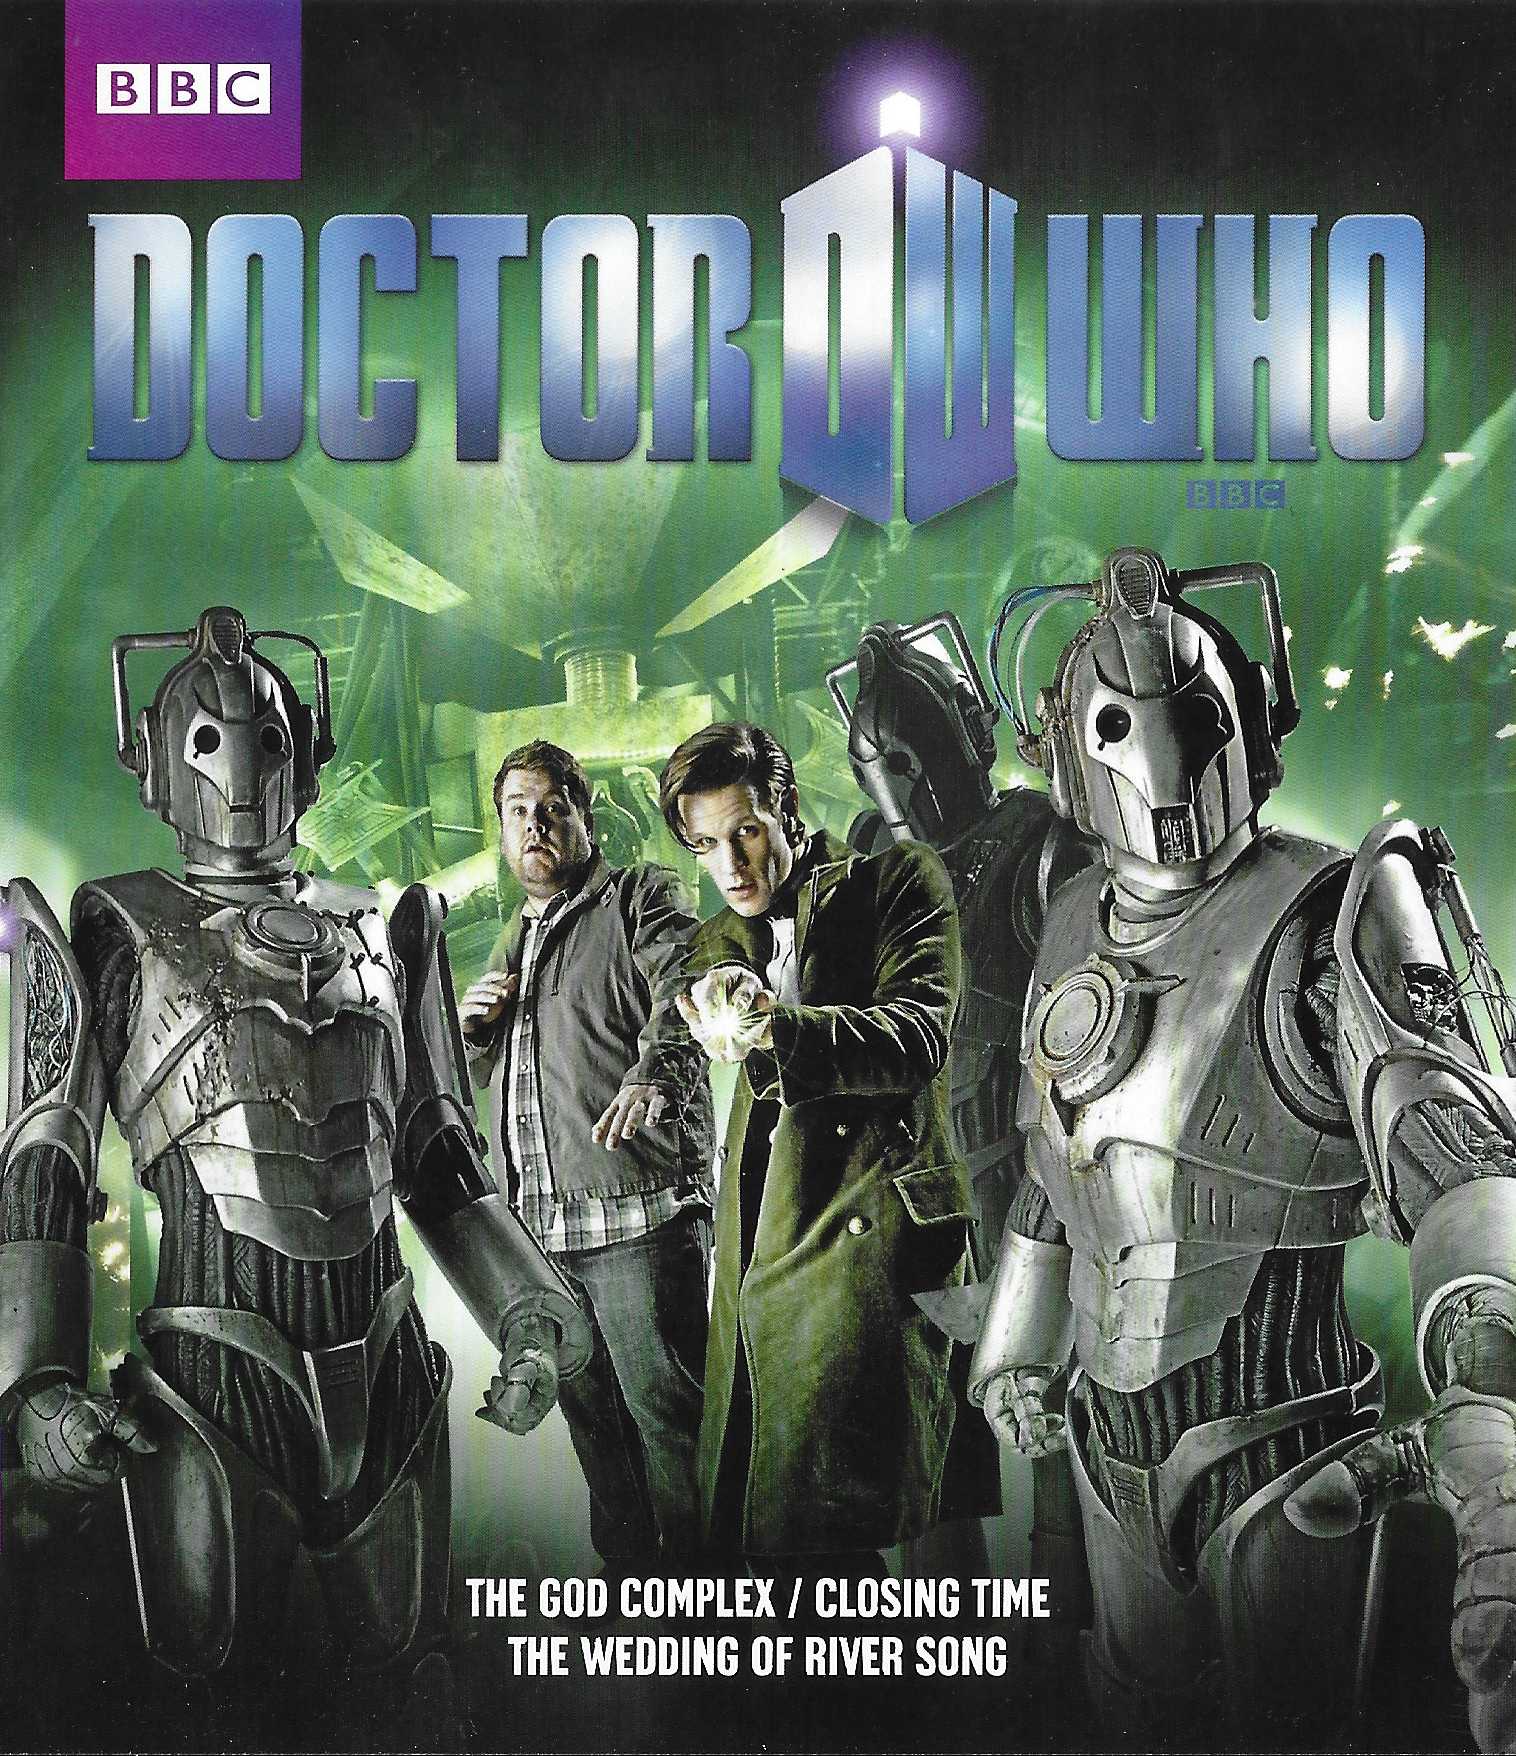 Picture of BBCBD 0152B Doctor Who - Series 6, part 2b blu-ray by artist Toby Whithouse / Gareth Roberts / Steven Moffat from the BBC records and Tapes library